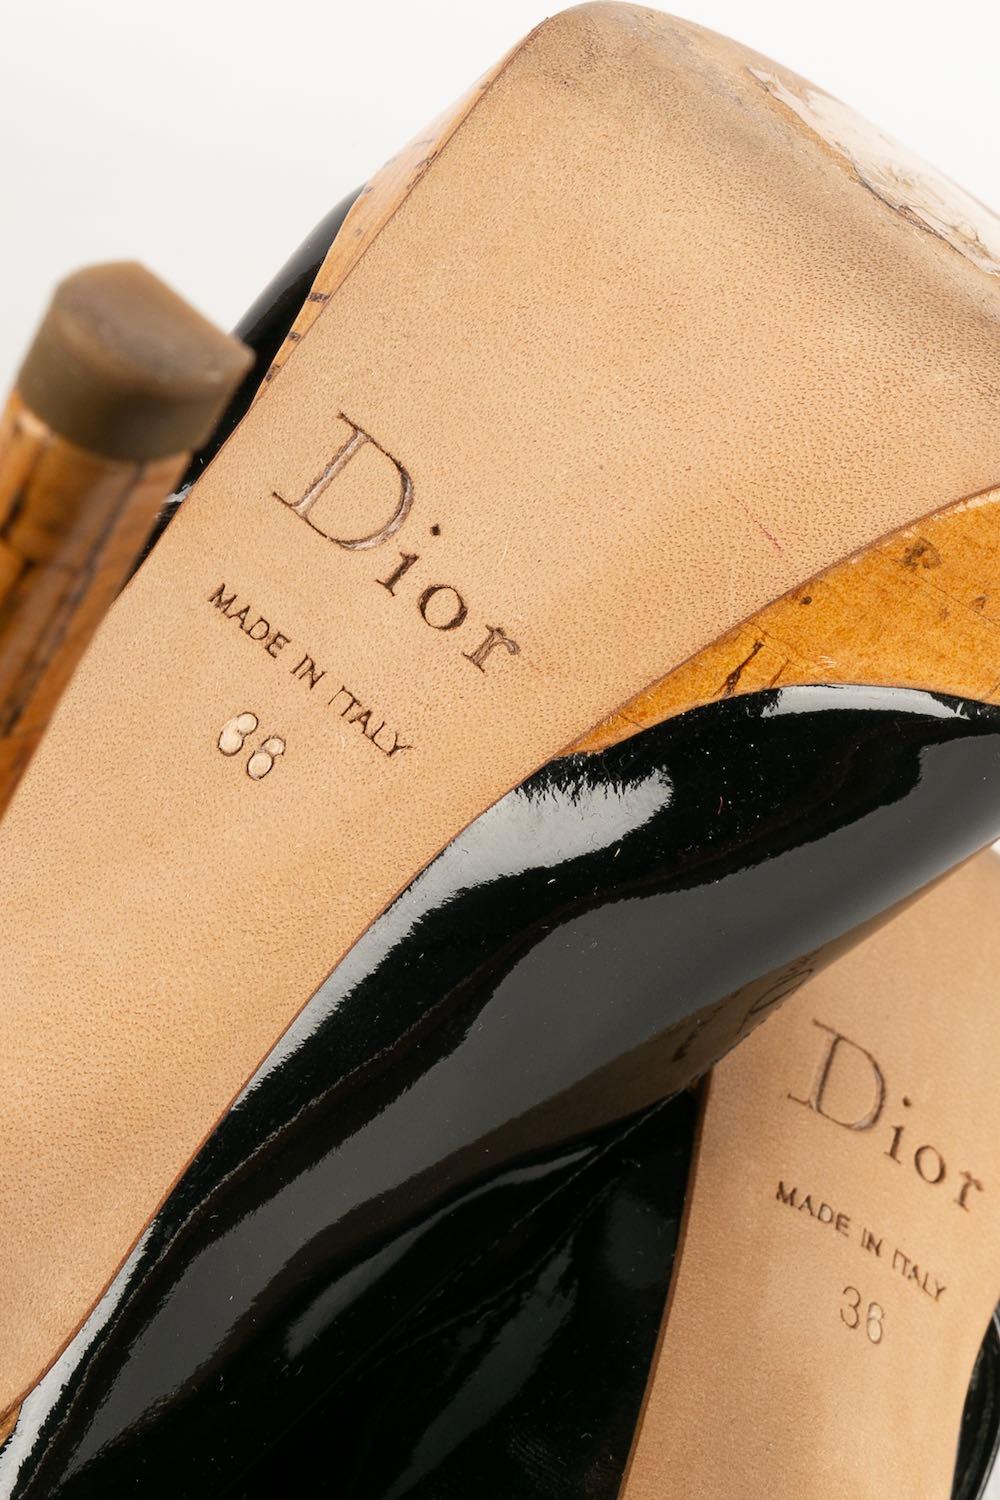 Dior Shoes in Patent Leather Pumps For Sale 4